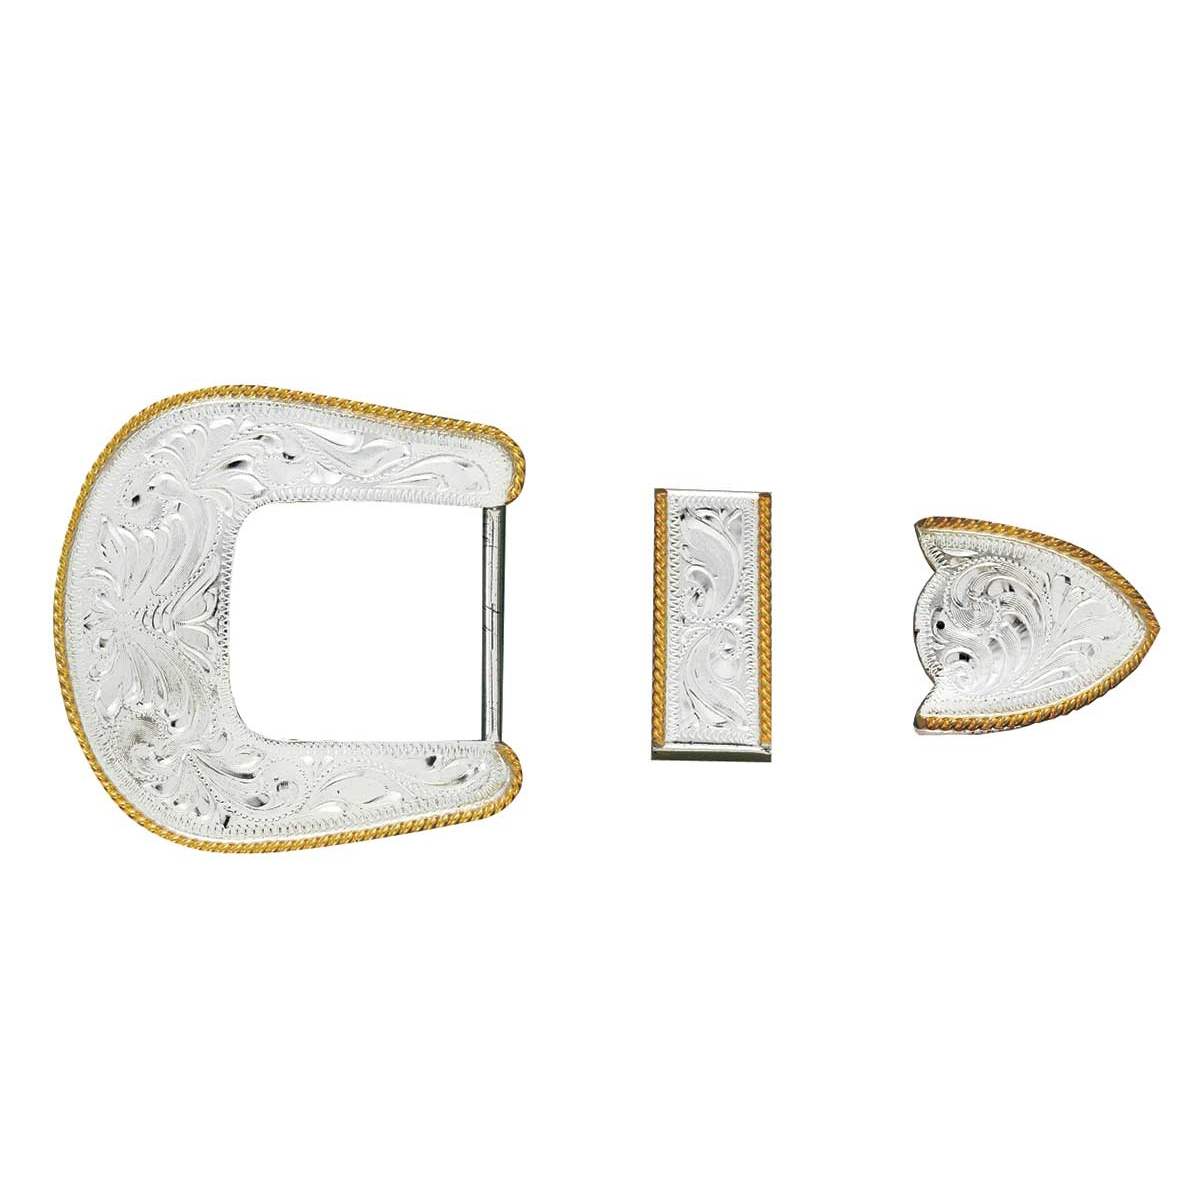 MF-C10825 Buckle Set Silver & Gold Plated, 1-1/2" 3-piece set